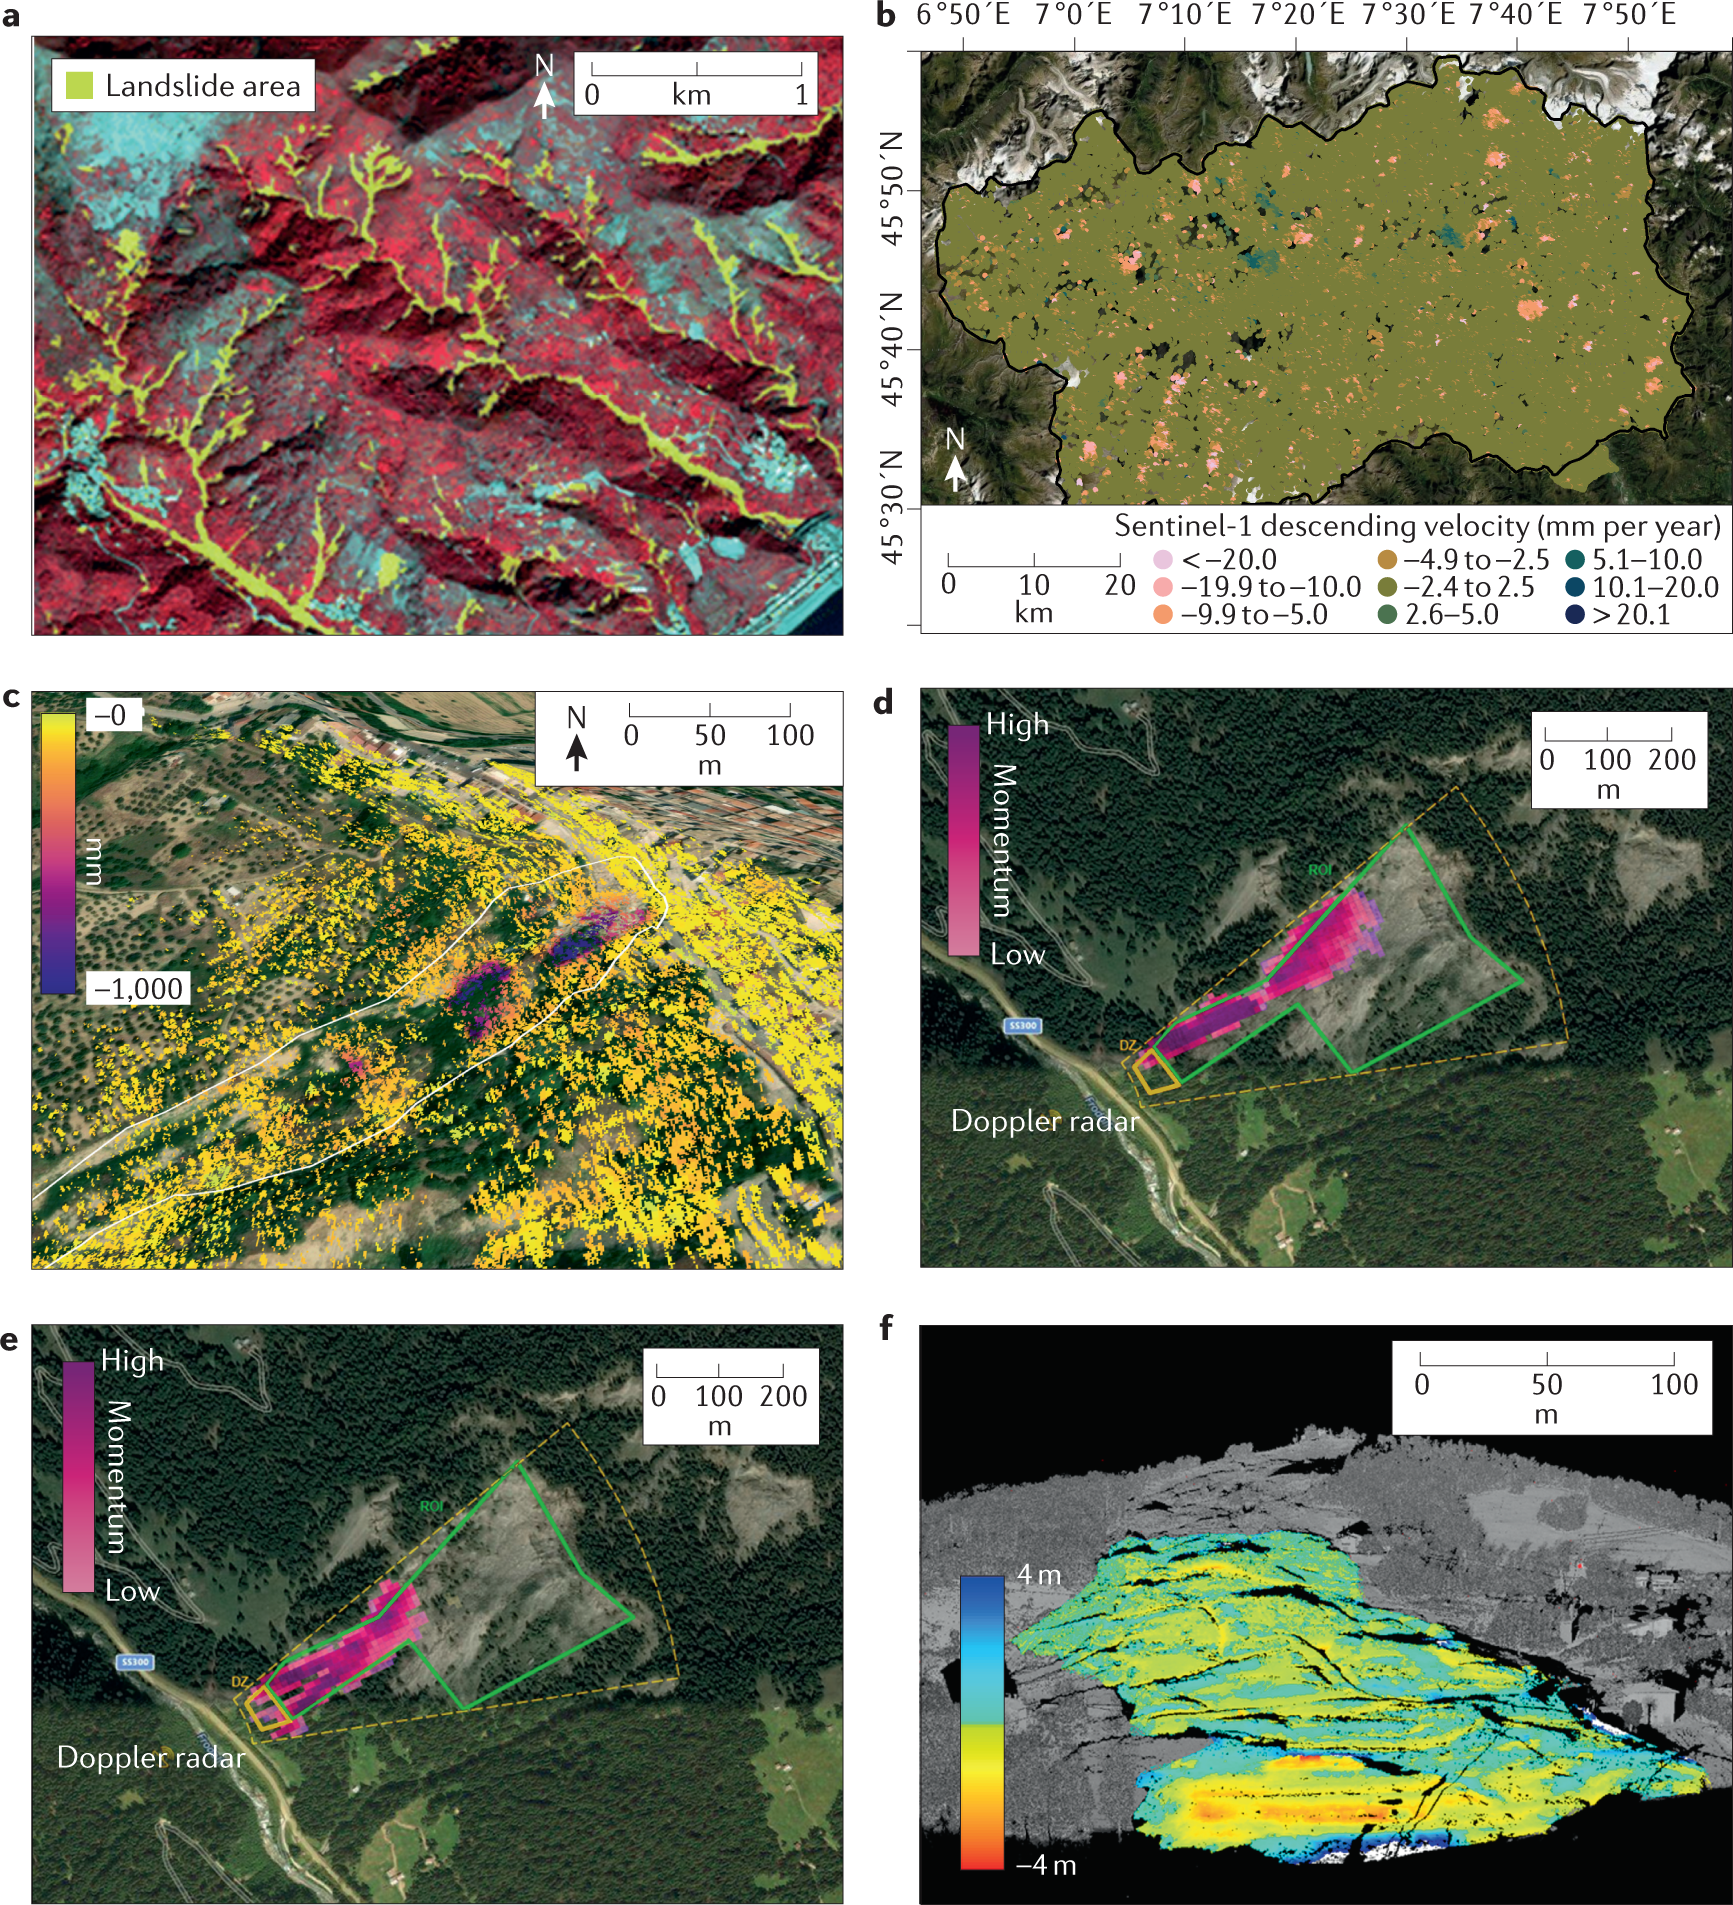 Remote Sensing  January 2017 - Browse Articles